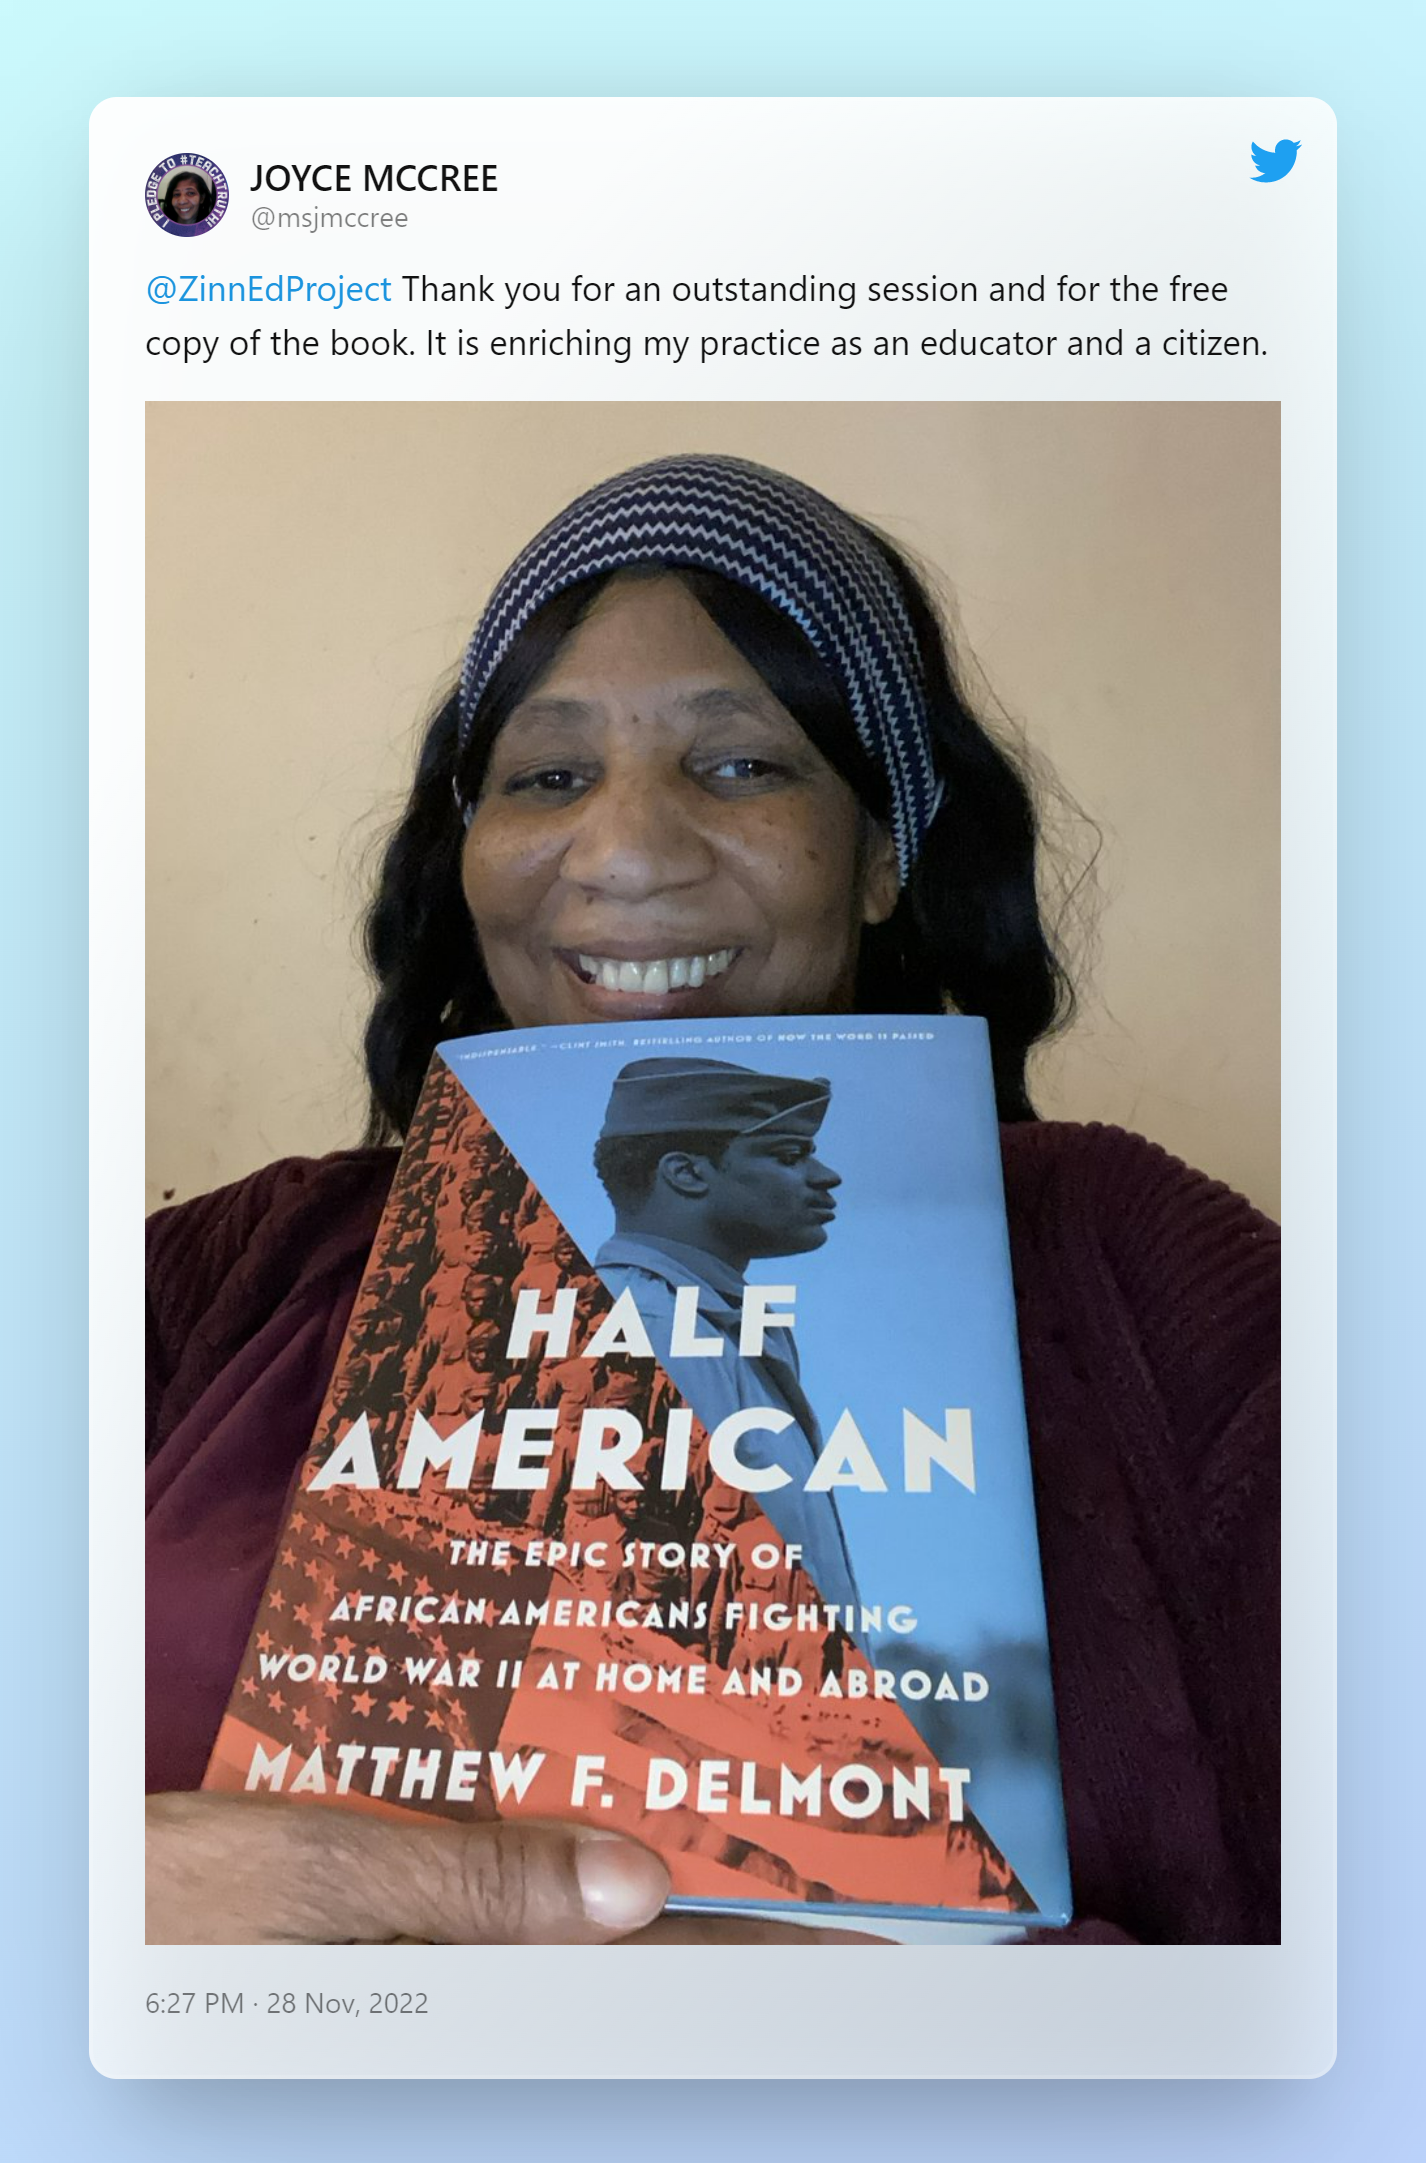 A twitter post from Joyce McCree with a picture of her holding the book Half American